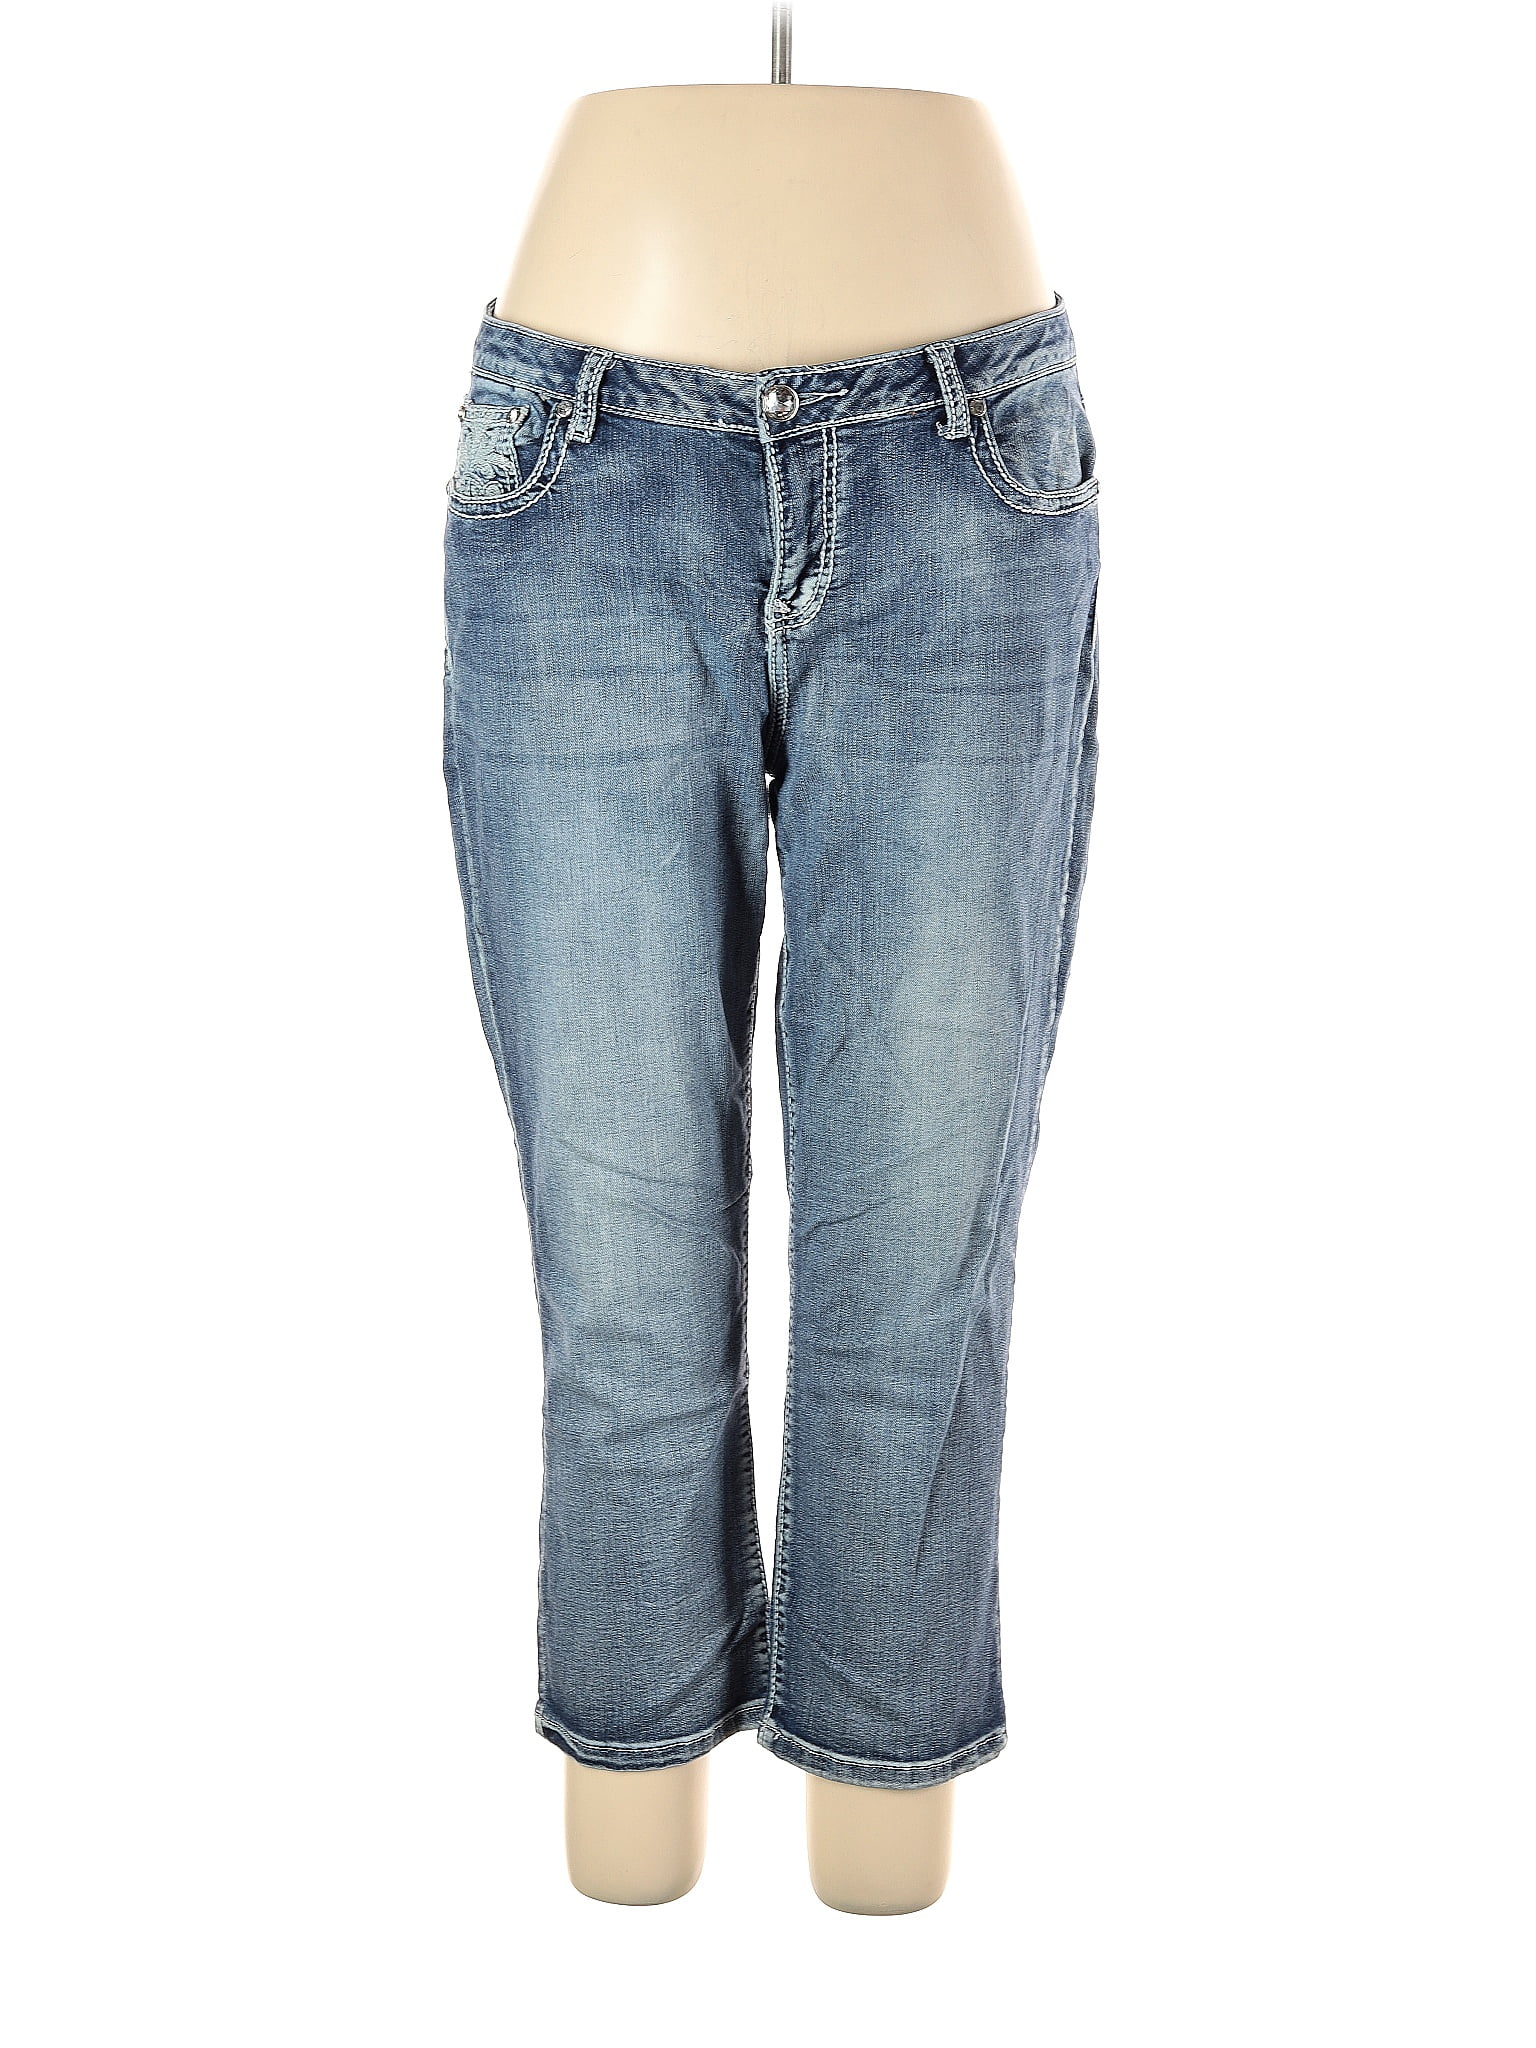 Apt. 9 Solid Blue Jeans Size 16 - 48% off